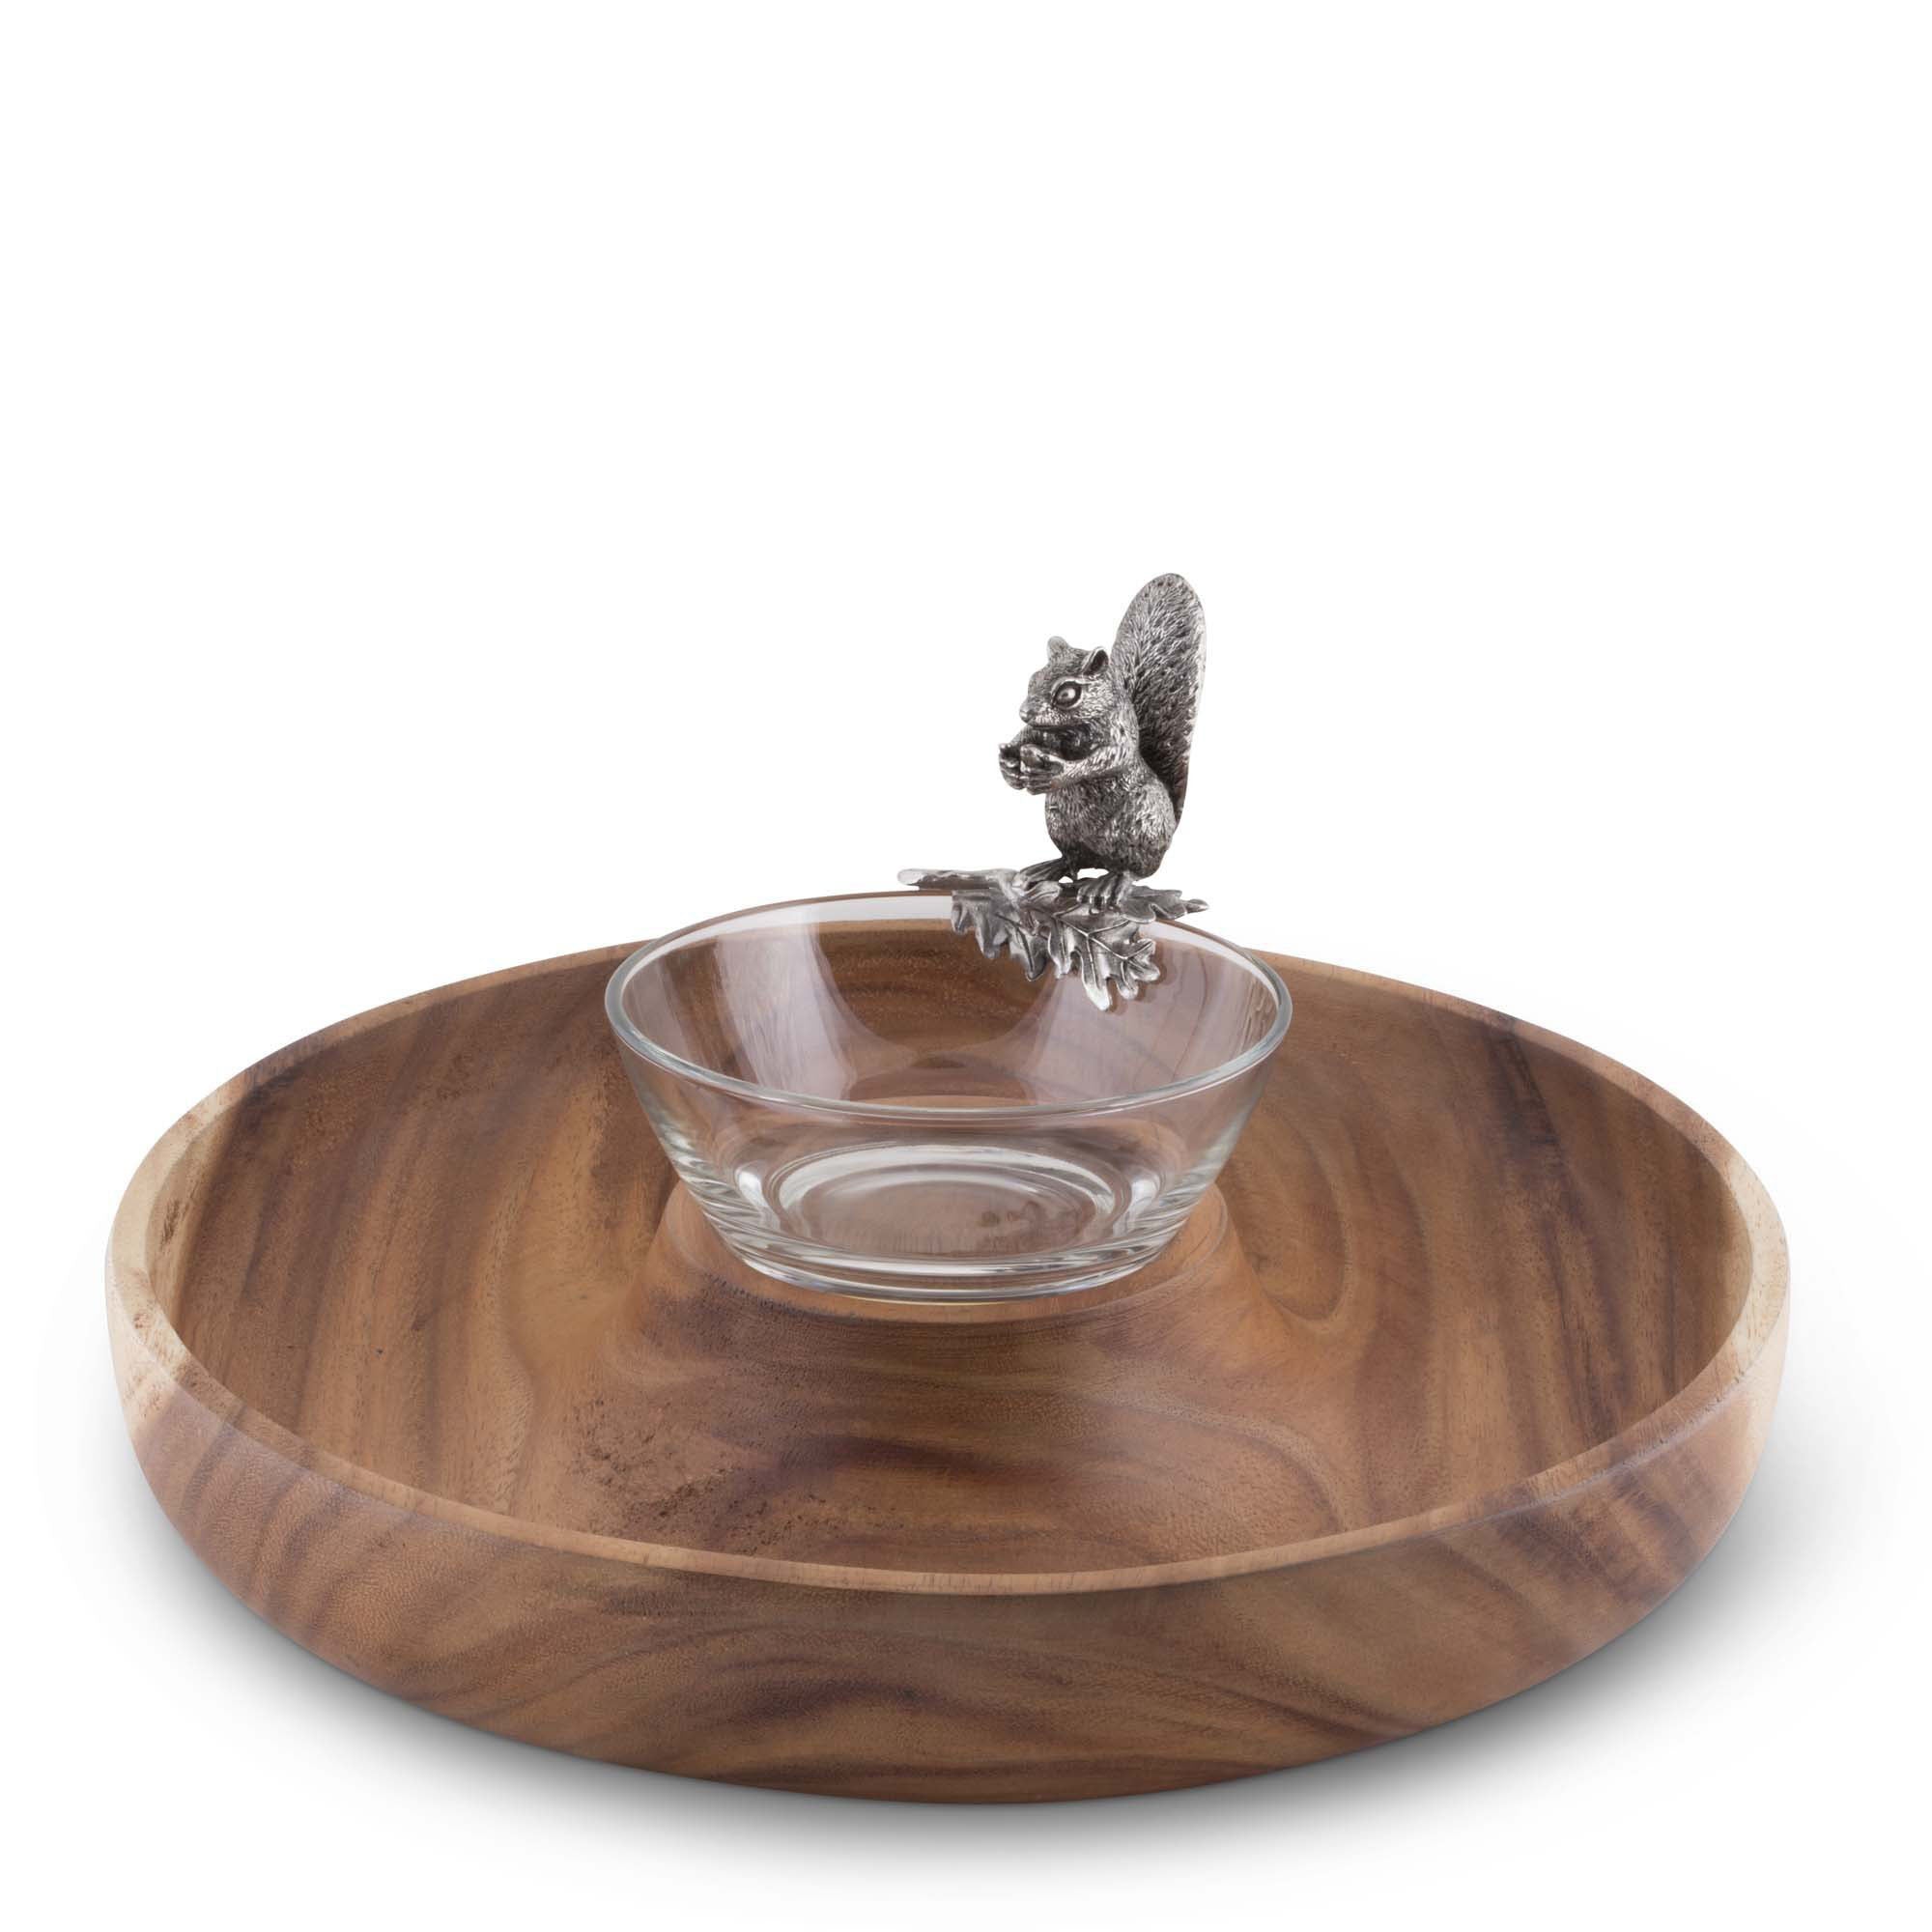 Vagabond House Squirrel Ring Serving Bowl Product Image